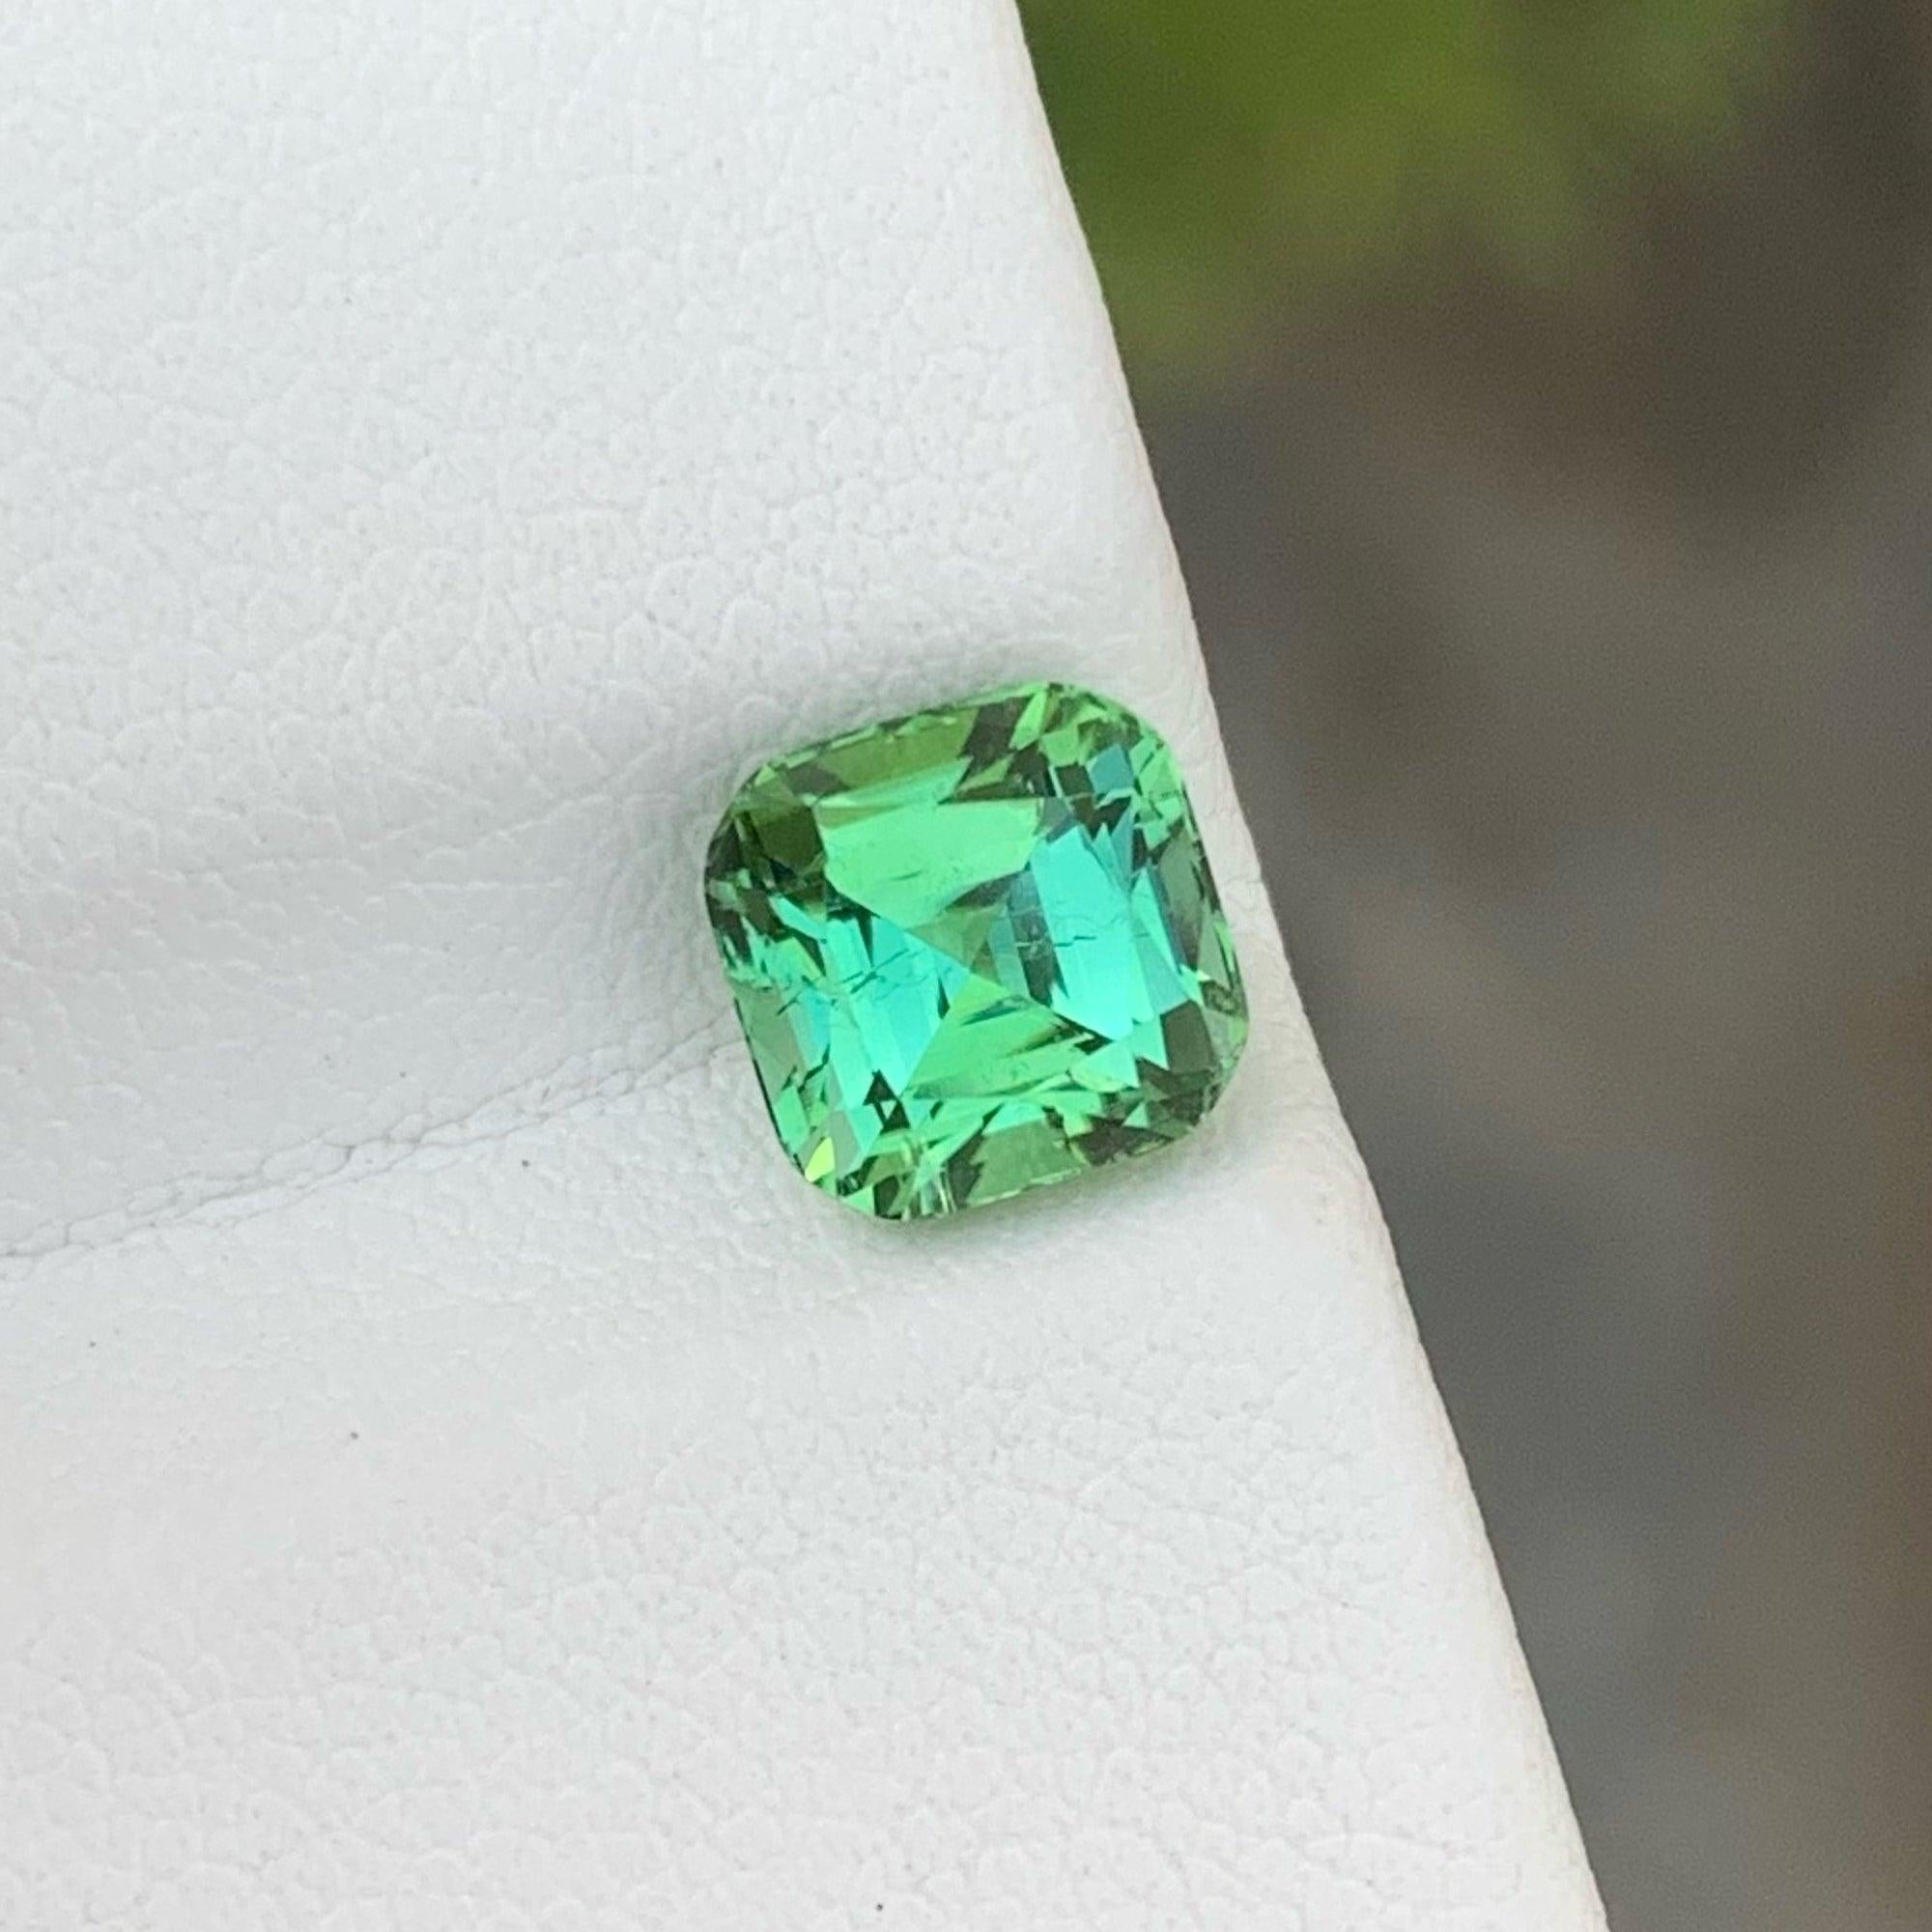 Cushion Cut Natural Bluish Green Loose Tourmaline Gem 1.85 Ct Afghan Tourmaline for Jewelry For Sale